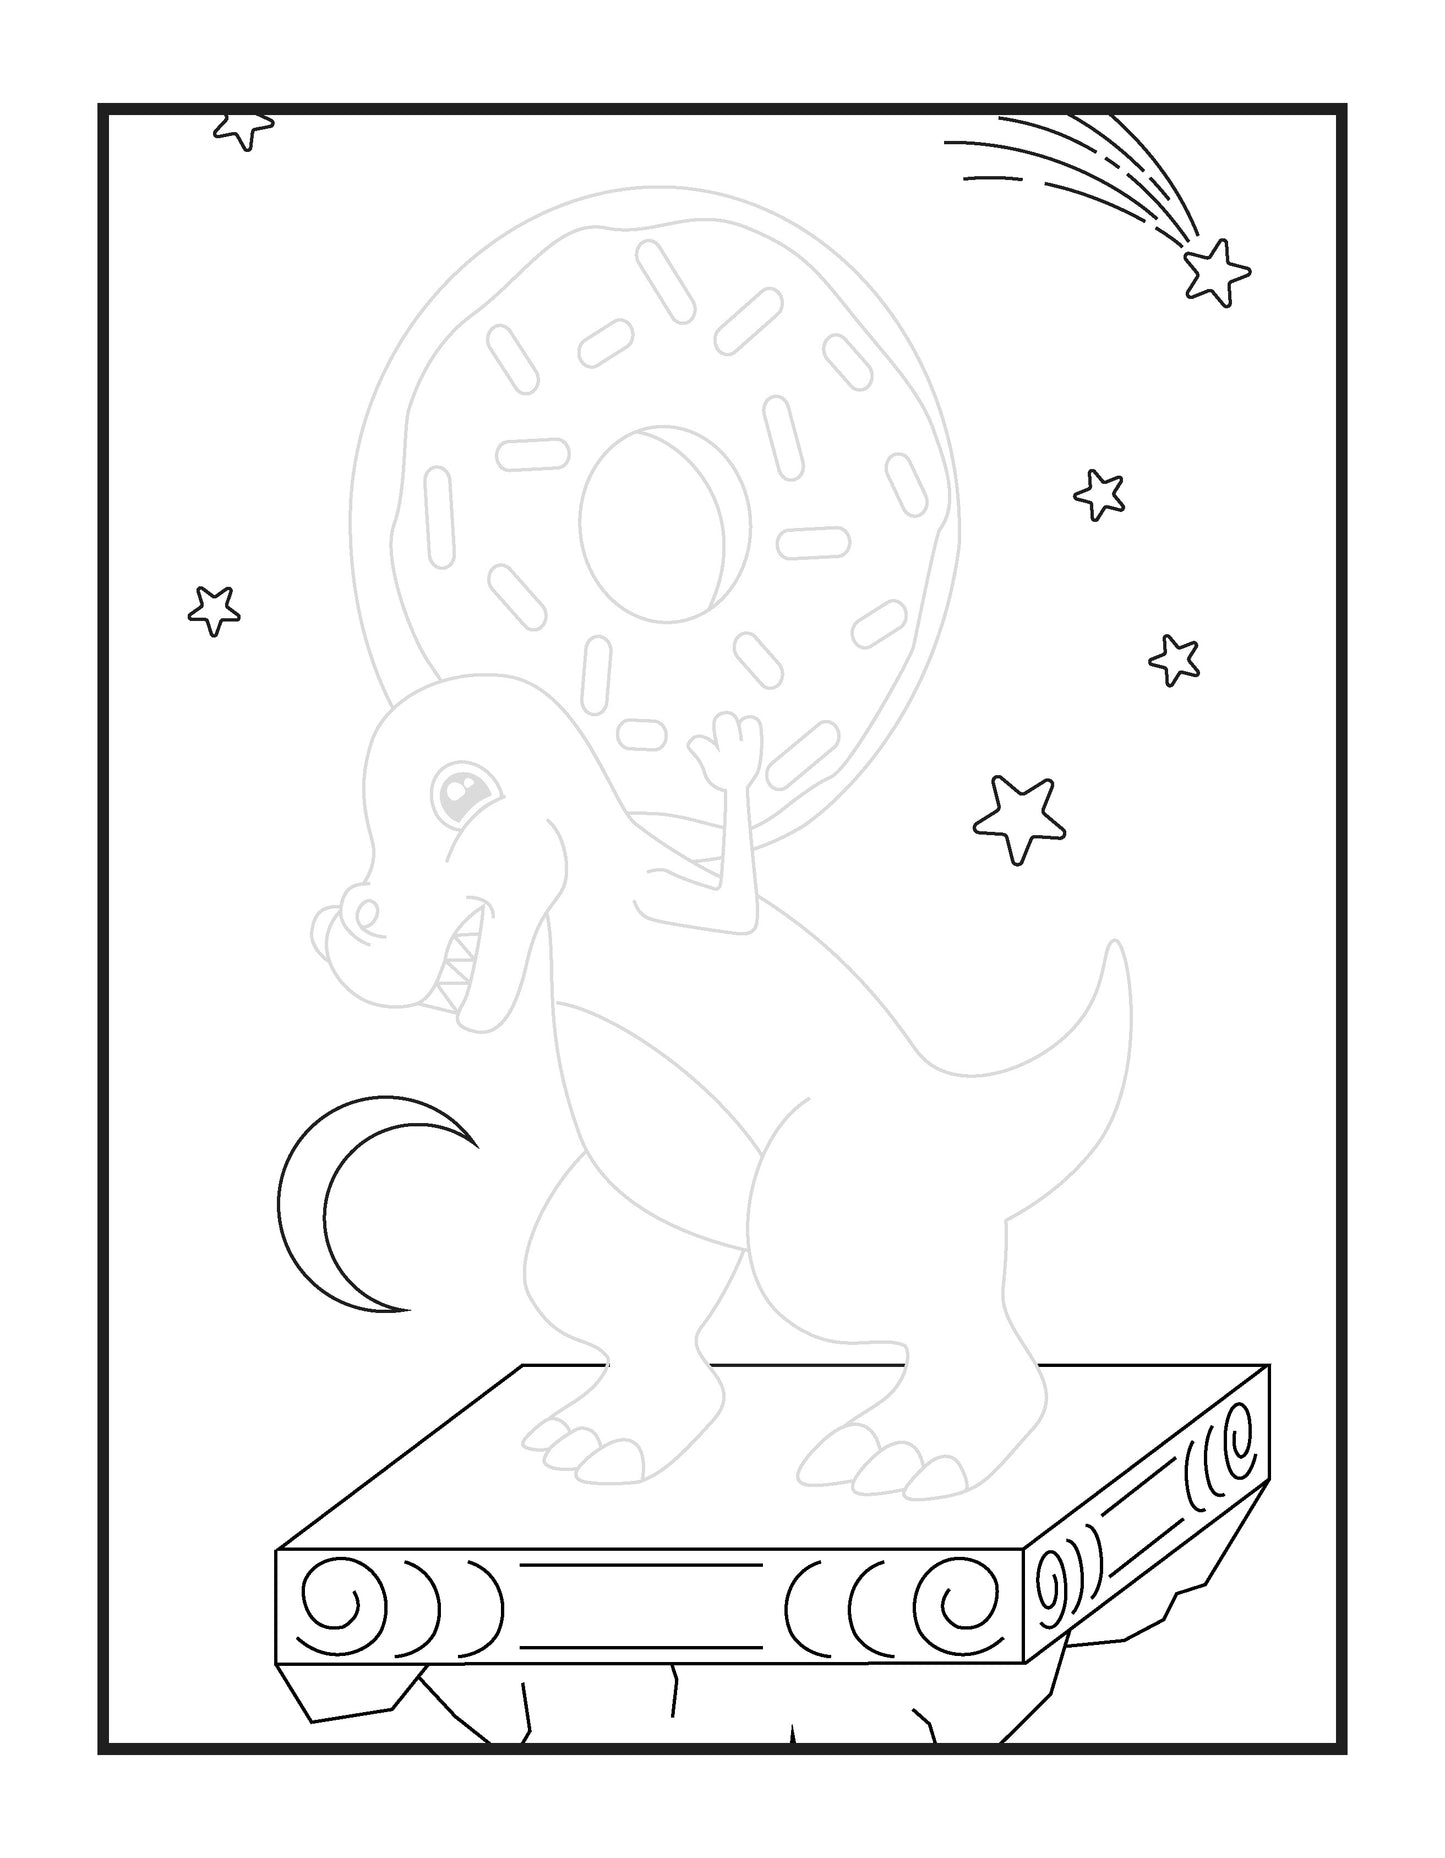 A whimsical black and white coloring page depicts a cartoon dinosaur standing on a platform in a starry night scene, playfully balancing a large, decorated donut on its back. The donut is detailed with sprinkles, and the dinosaur looks delighted, adding to the scene's playful nature. Shooting stars, smaller stars, and a crescent moon decorate the sky, inviting children to color and add their imaginative touch to a scene that combines the prehistoric with the magical.